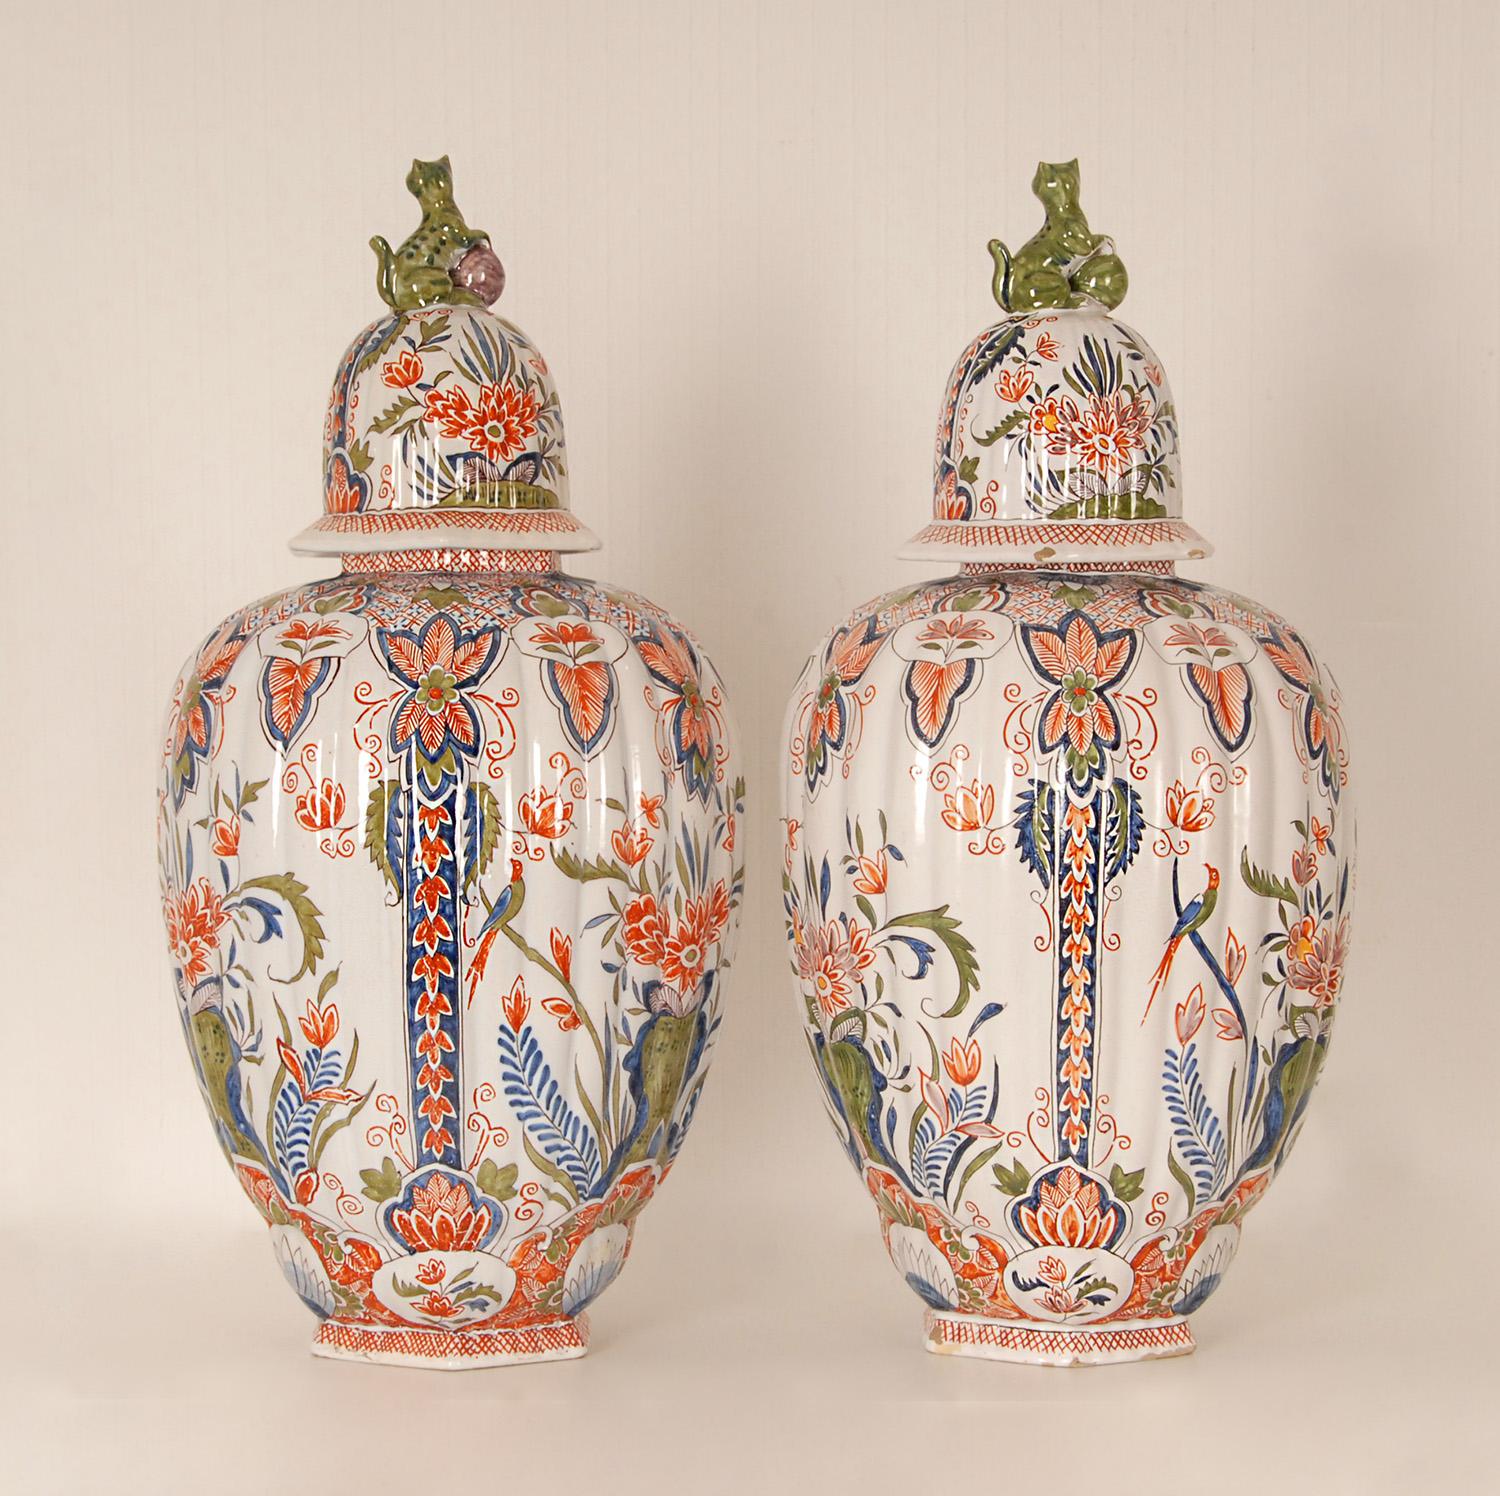 Antique Delft Vases Polychrome Covered Baluster Vases With Foo Cats - a pair For Sale 2